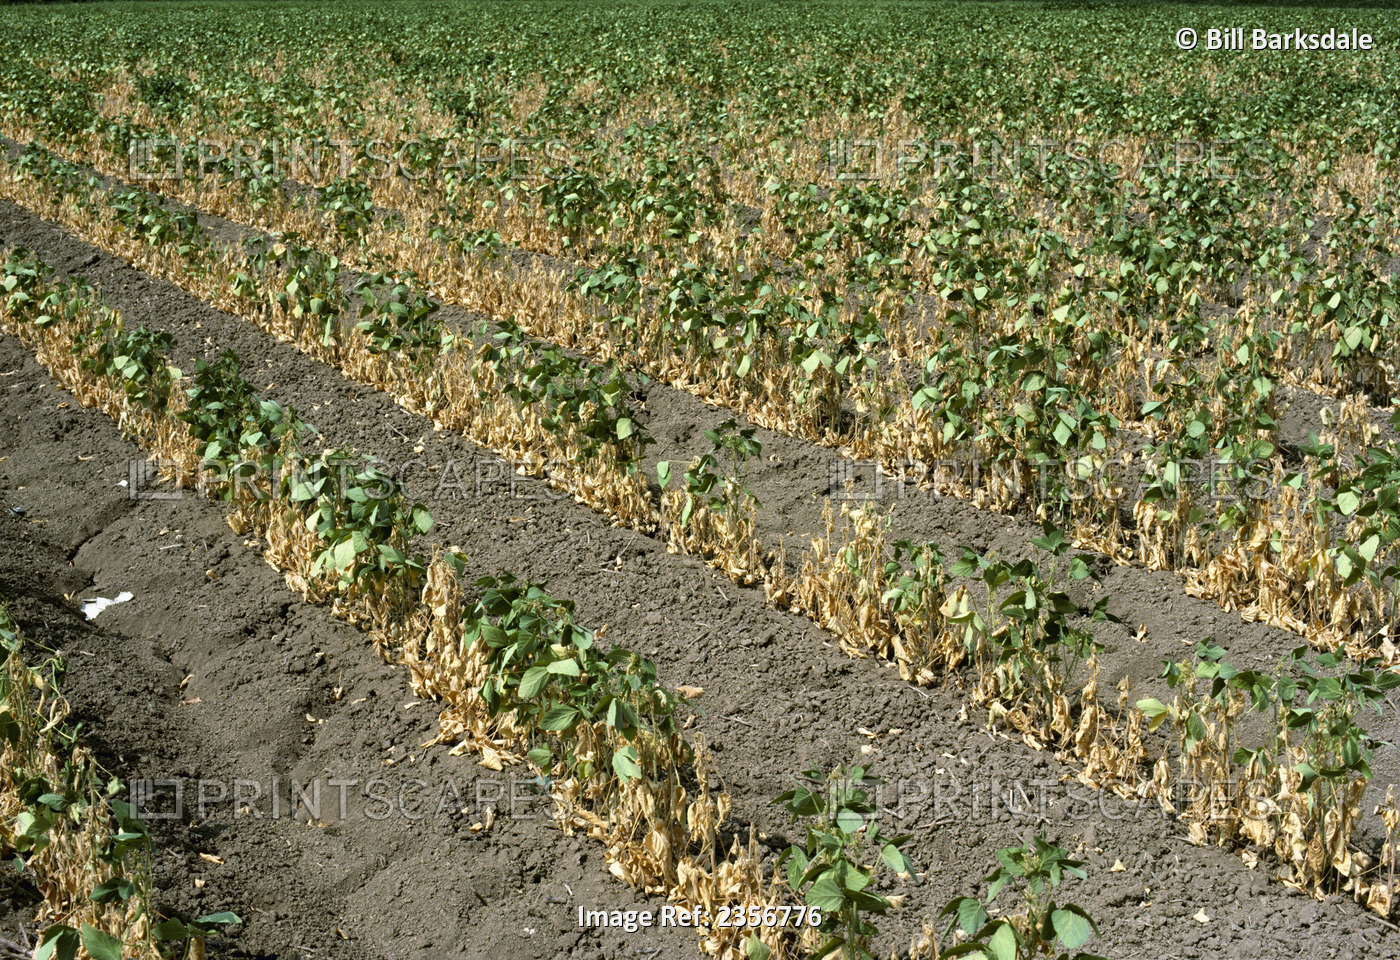 Agriculture - Drought damaged soybeans / Arkansas, USA.